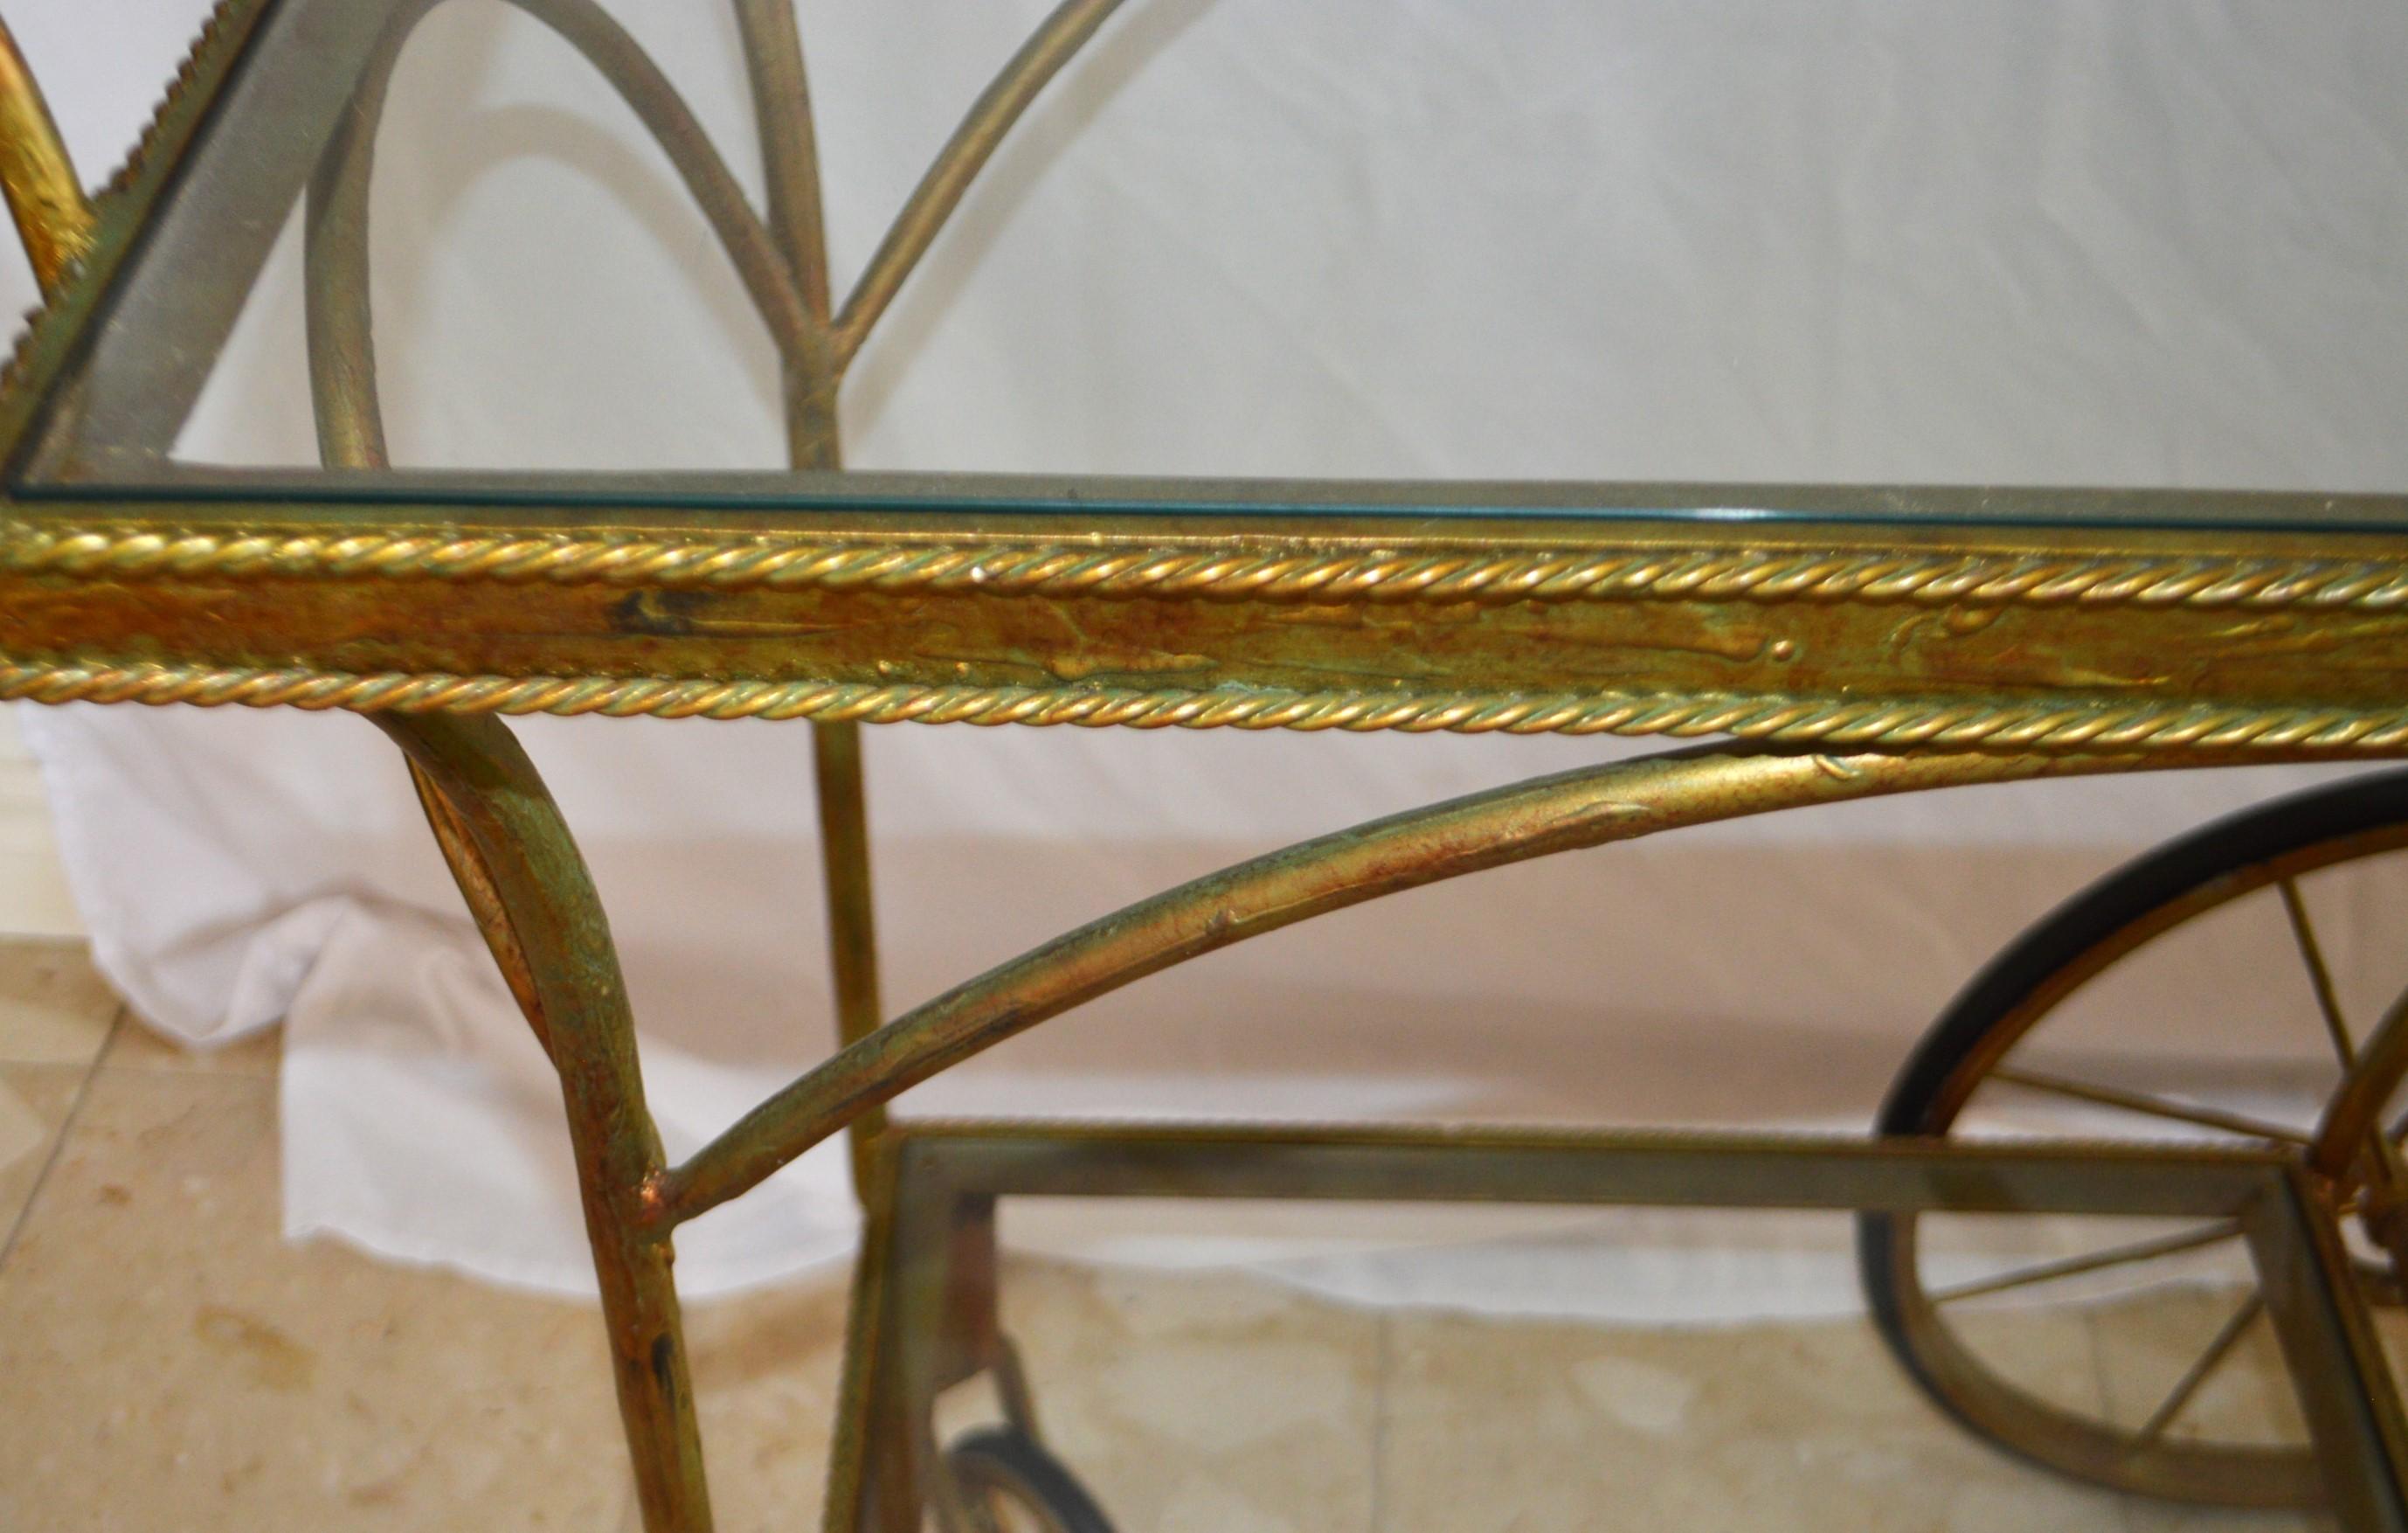 Gilt Gilded Wrought Iron Bar Cart on wheels with two levels with glass tops.